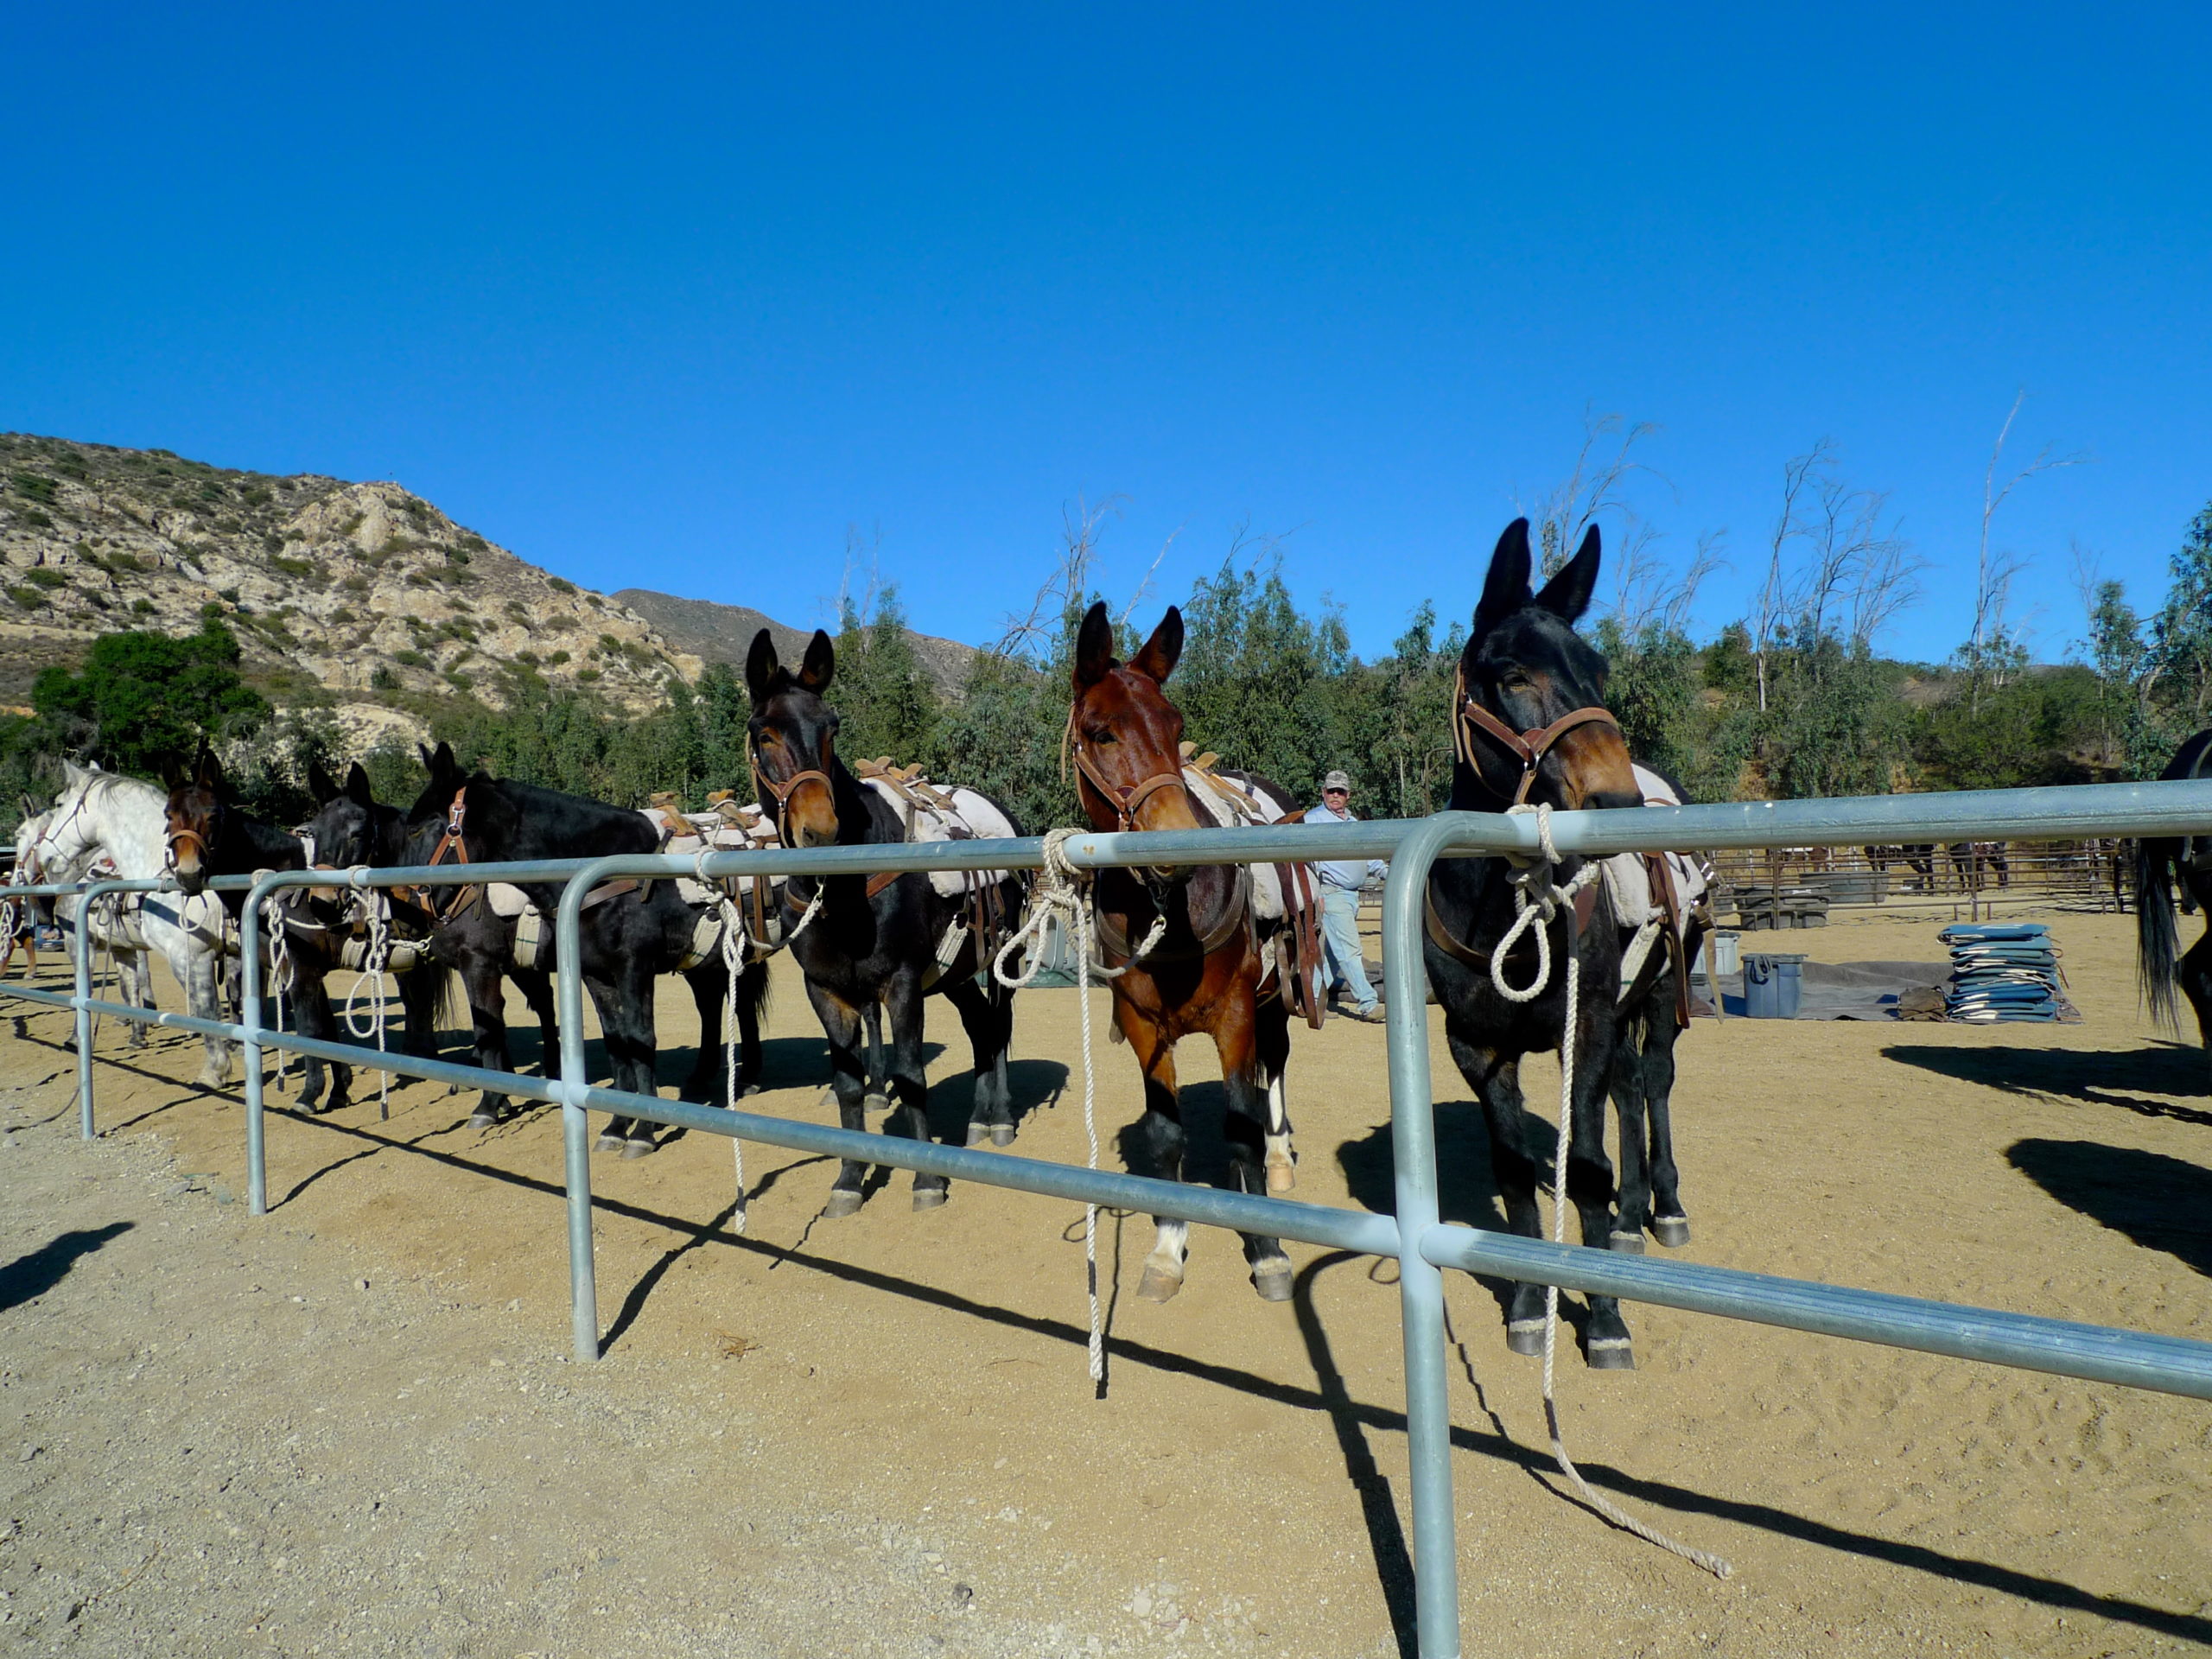 The Los Angeles Aqueduct Turns 100, Or The Mules That Built LA